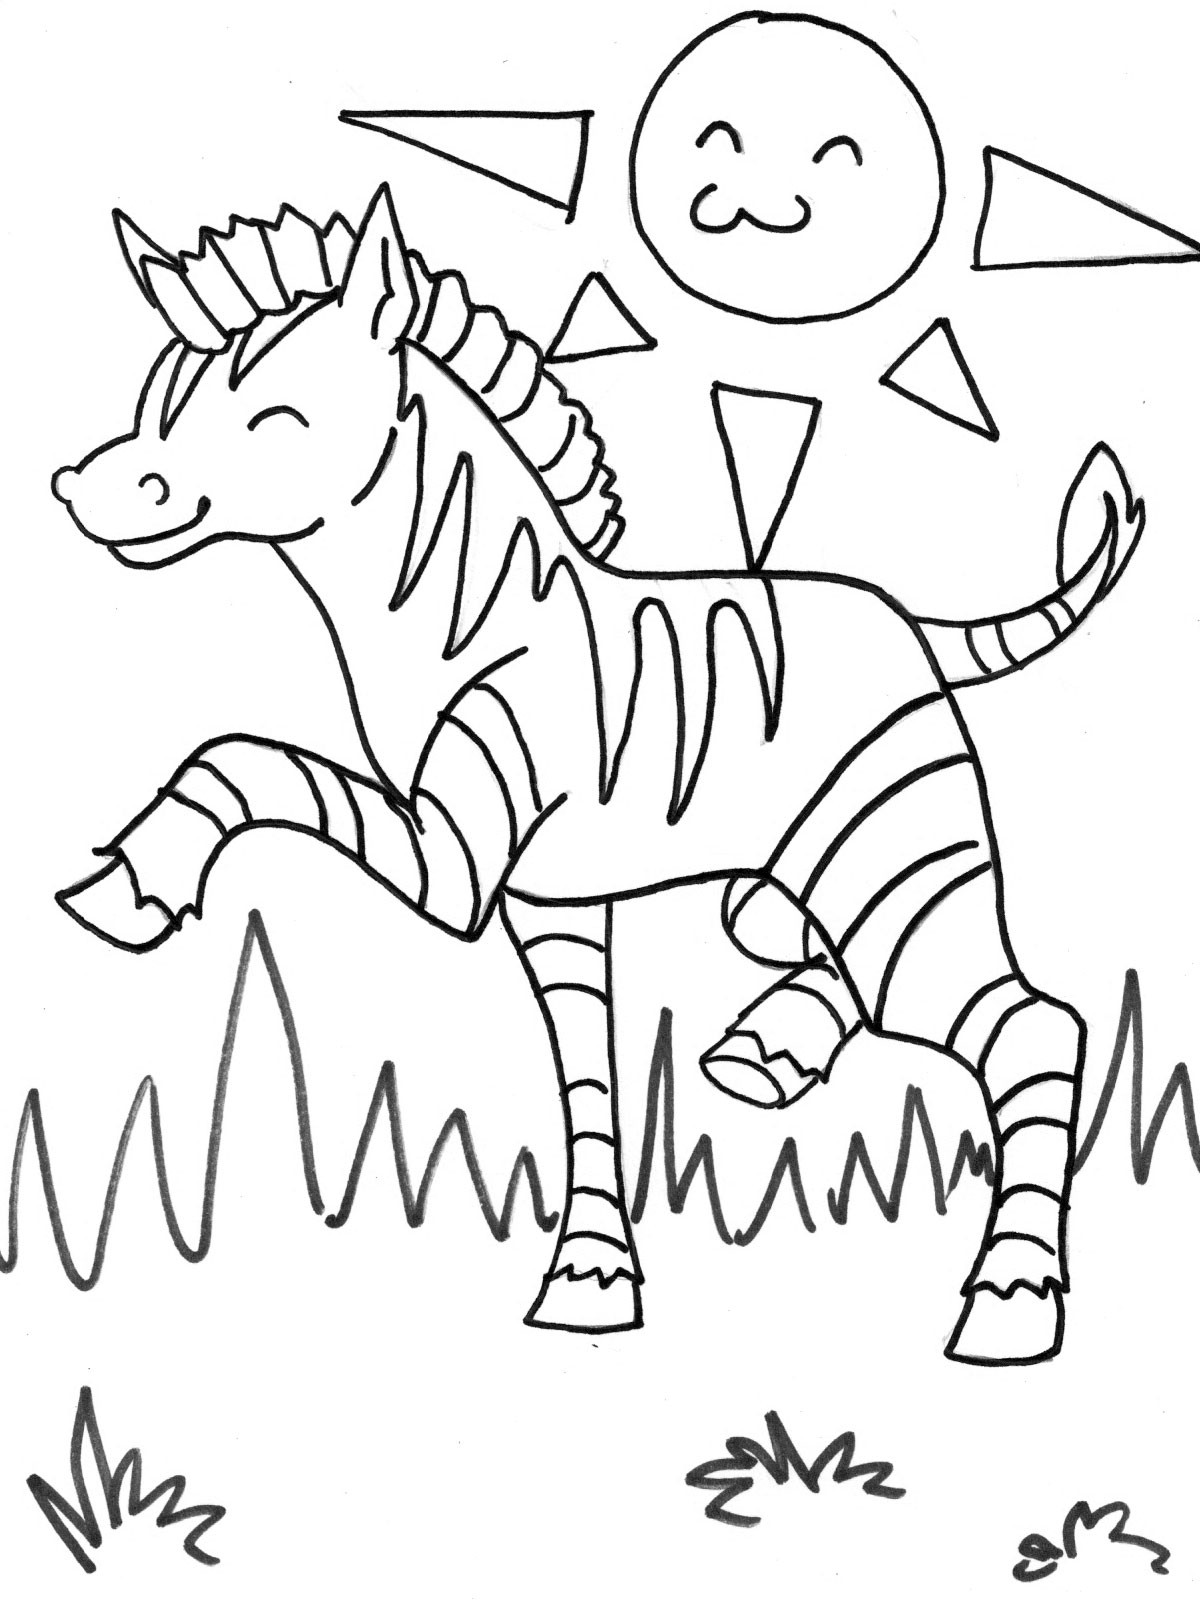 Coloring Book Printer
 Zebra Coloring Pages To Print